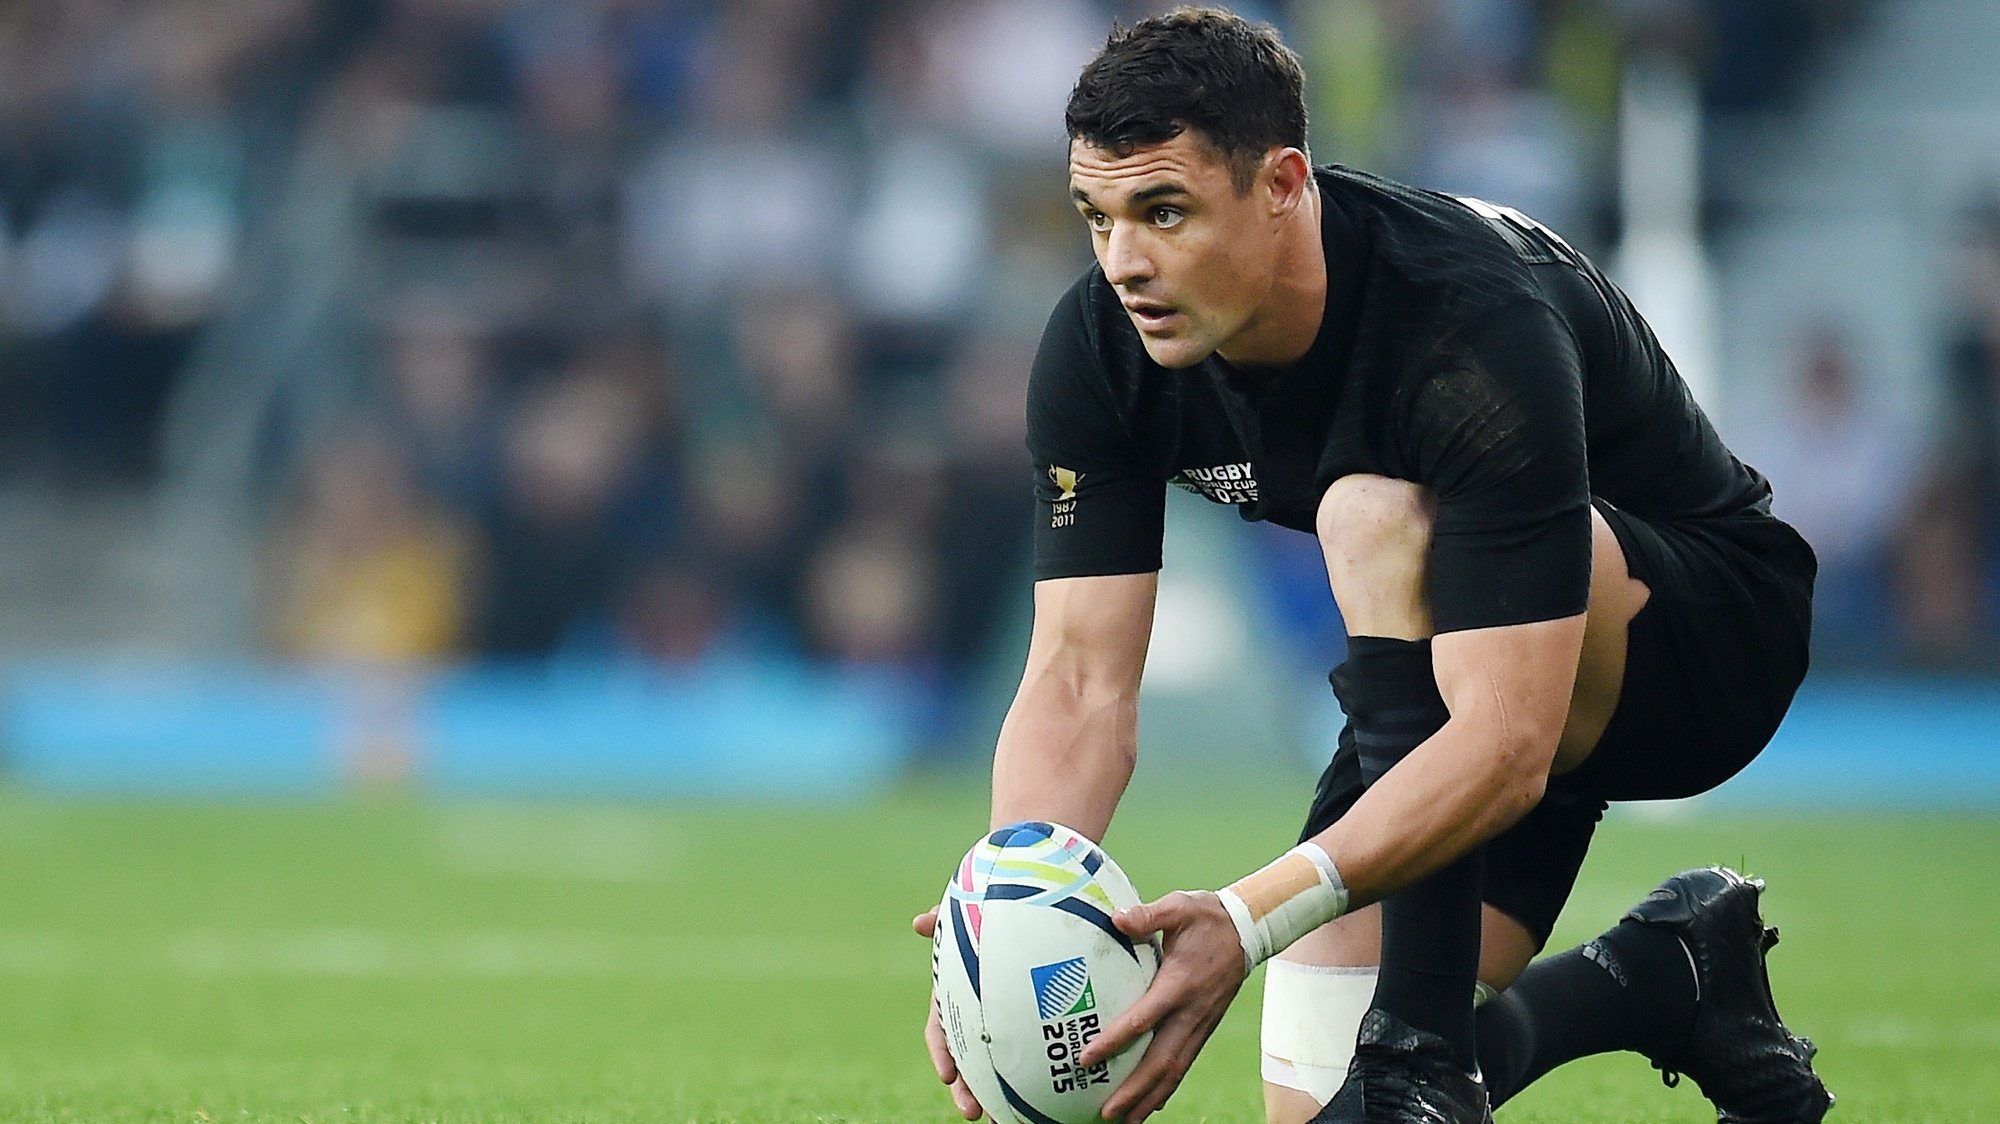 epa08463953 (FILE) - New Zealand&#039;s Dan Carter prepares a penalty kick during the Rugby World Cup 2015 final between New Zealand and Australia at Twickenham in London, Britain, 31 October 2015 (reissued 04 June 2020). Carter, a dual World Cup winner, has returned to New Zealand rugby after a five year absence.  EPA/ANDY RAIN EDITORIAL USE ONLY / NO COMMERCIAL SALES / NOT USED IN ASSOCIATION WITH ANY COMMERCIAL ENTITY